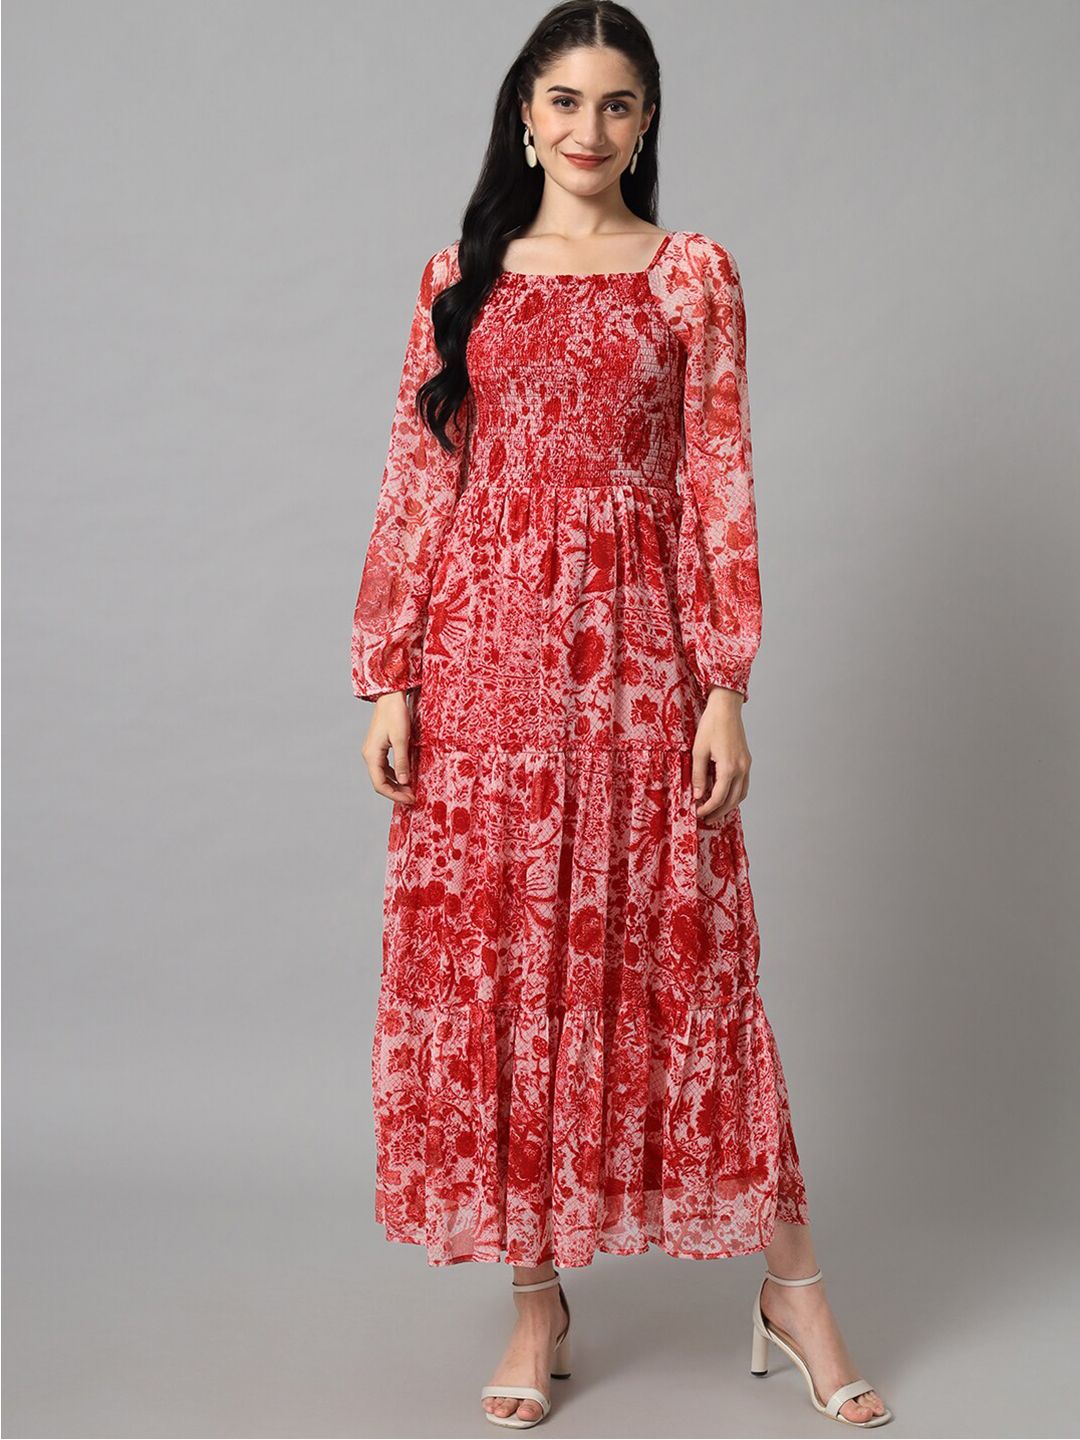 The Vanca Red Floral Empire Maxi Dress Price in India